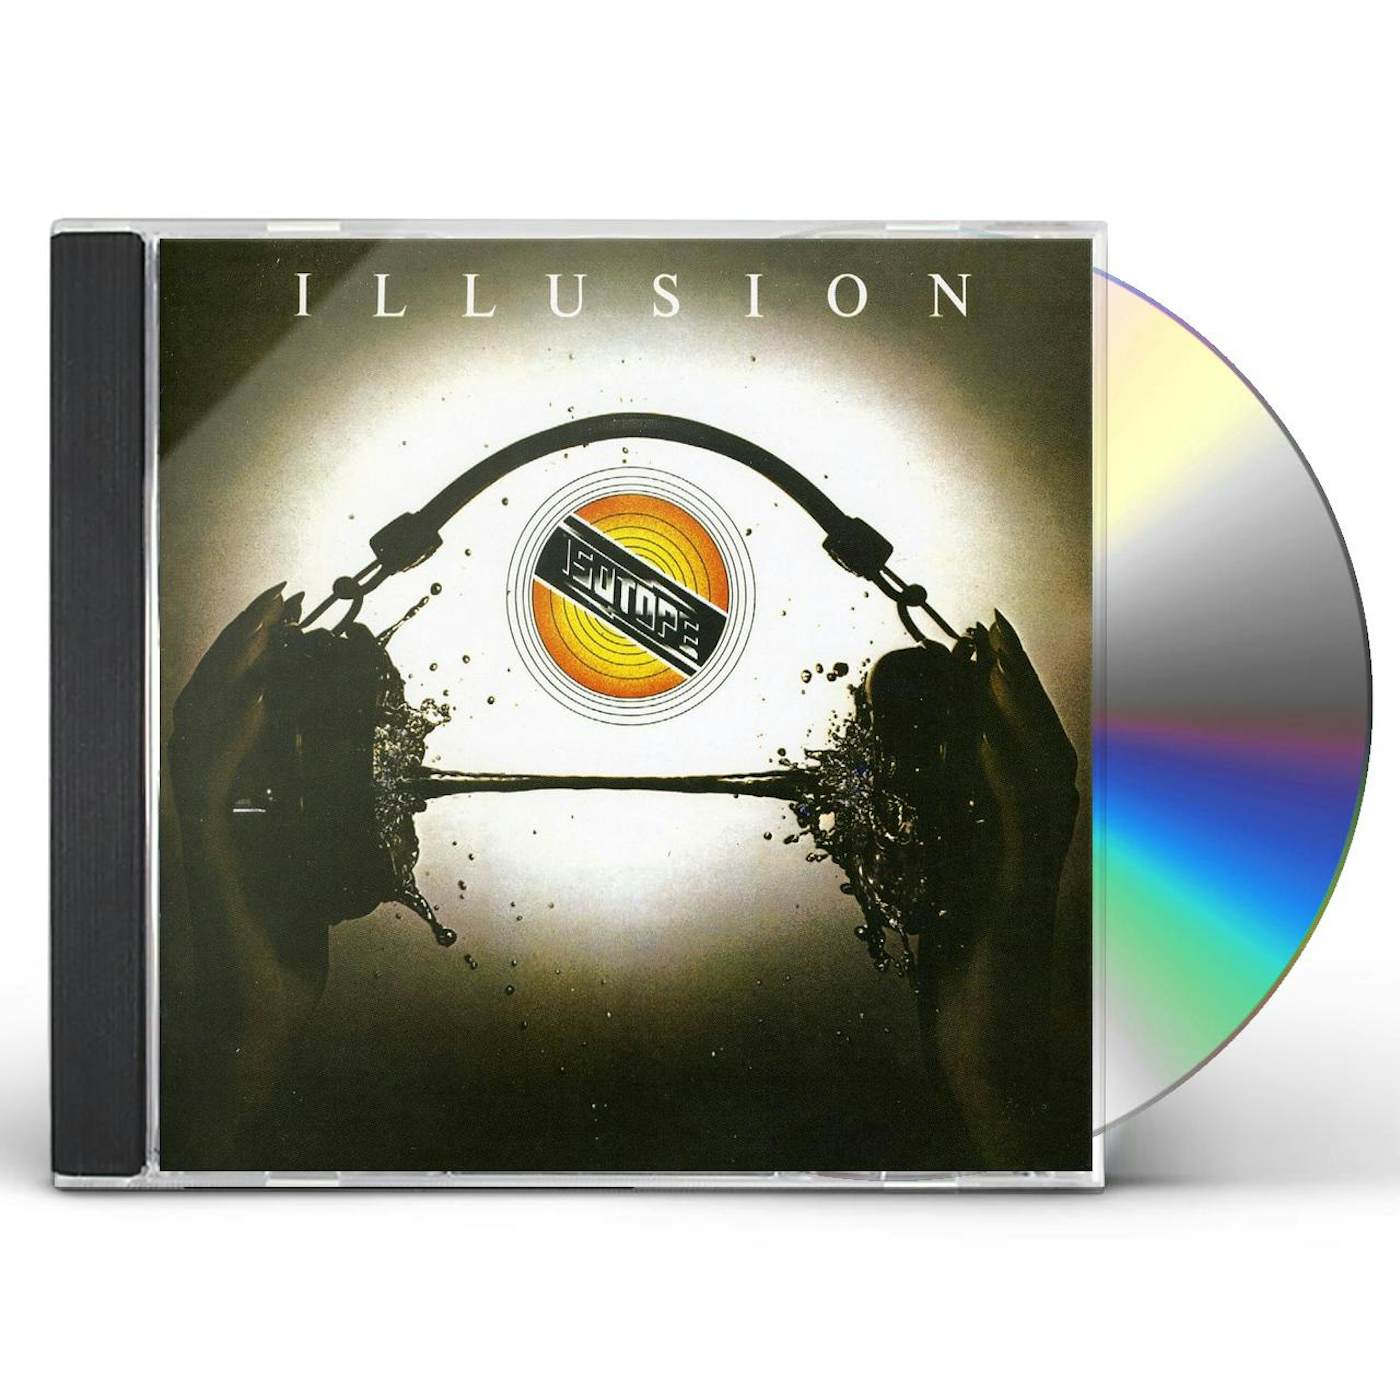 Isotope ILLUSION CD